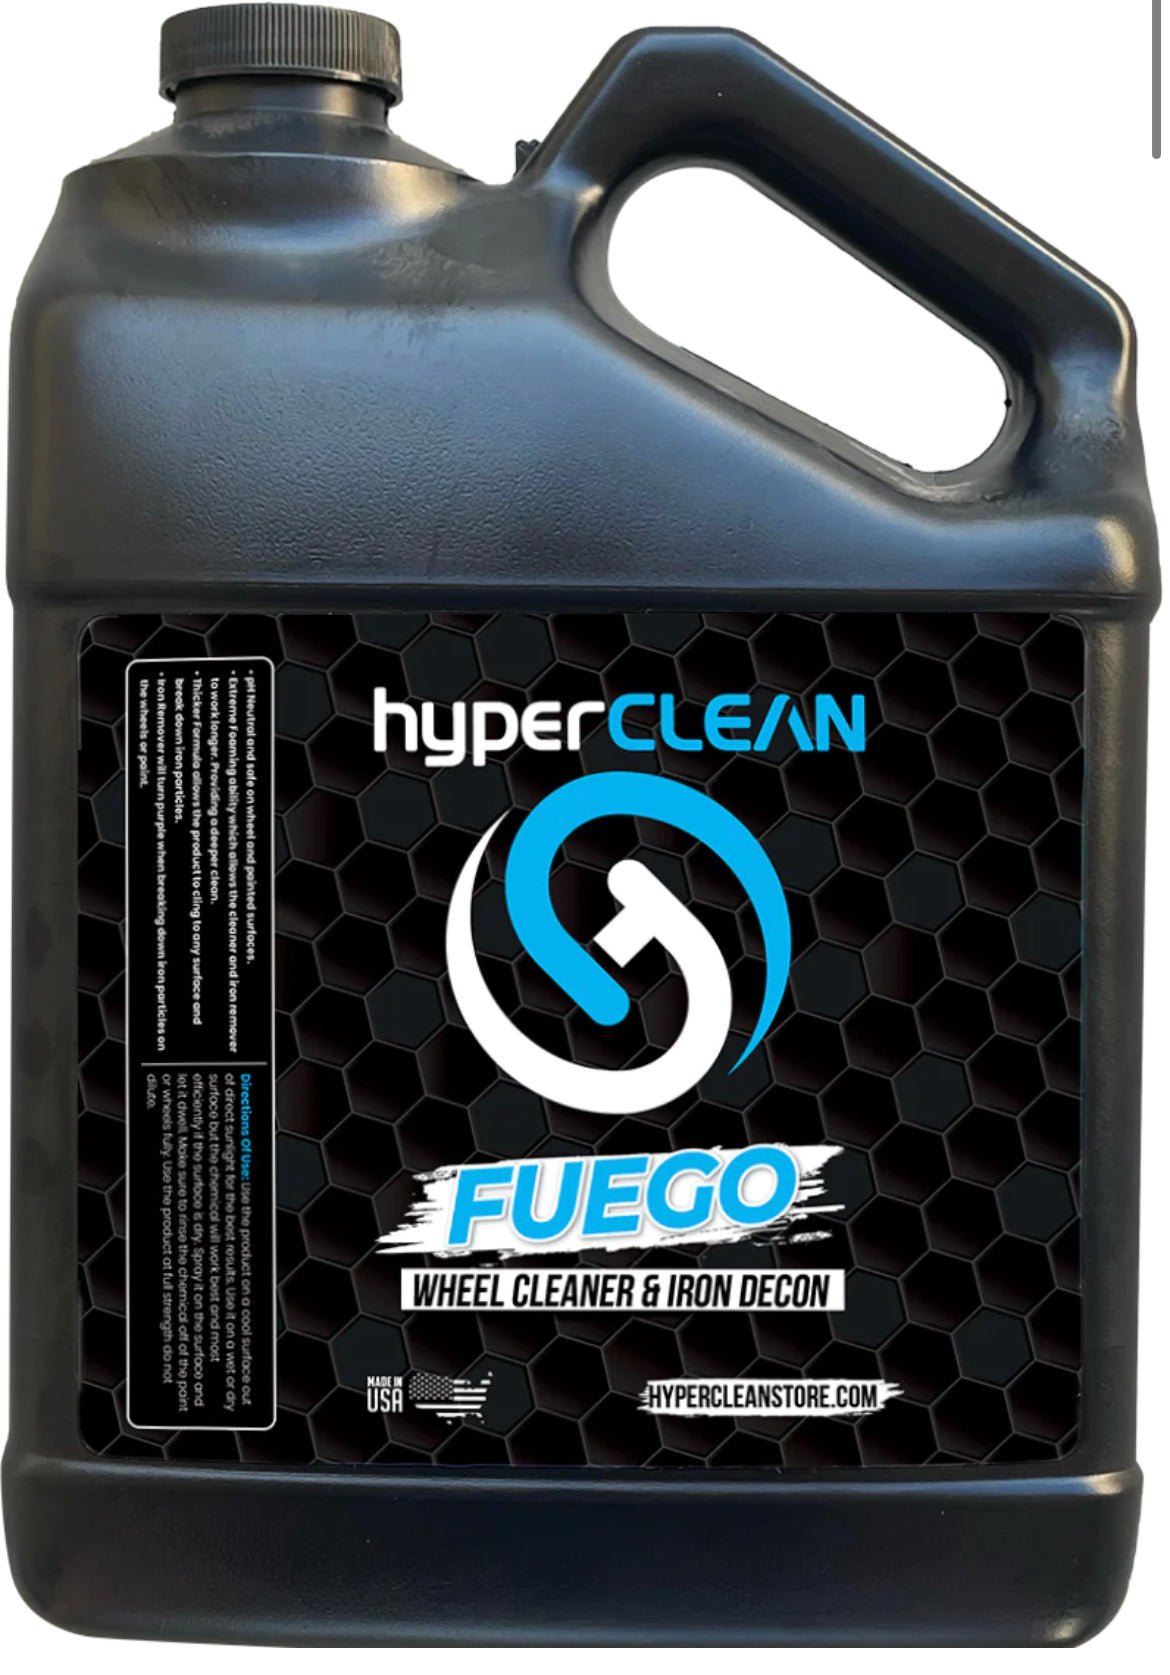 Fuego | 2 in 1 Wheel Cleaner and Iron Remover - Brothers Auto Perfection